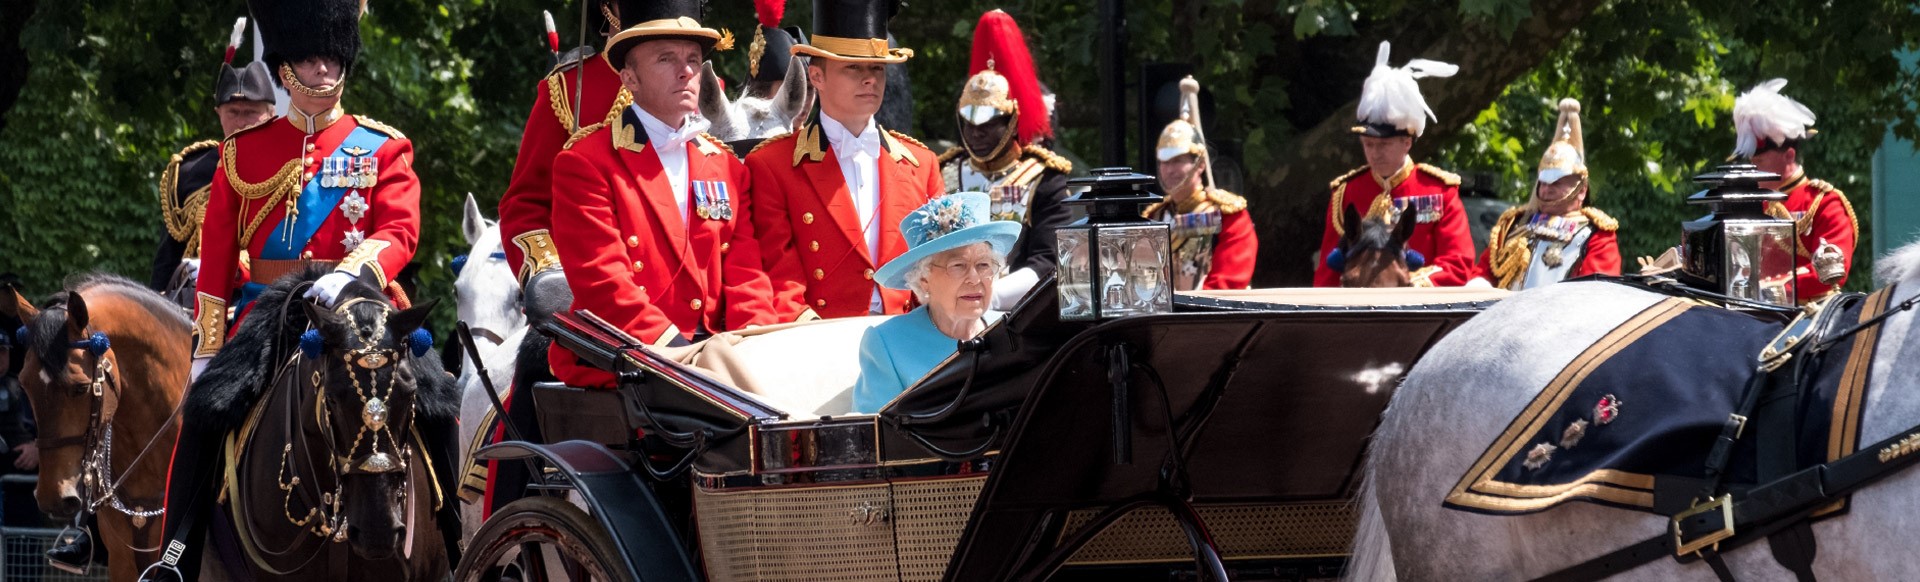 Queen Elizabeth II travels along The Mall in an open carriage pulled by horses, on her way from Buckingham Palace on a sunny day